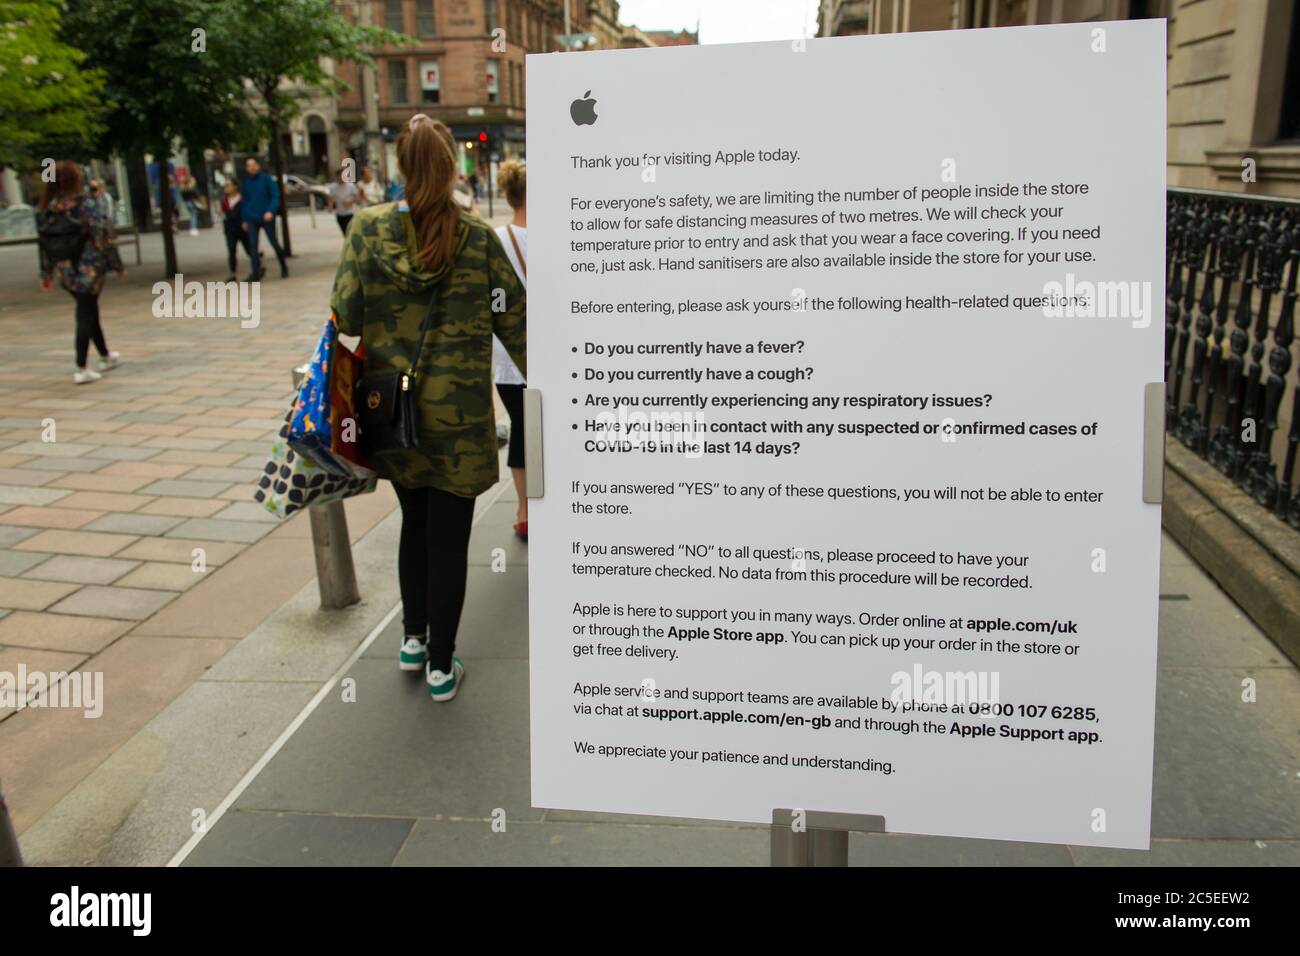 Glasgow, Scotland, UK. 2nd July, 2020. Pictured: Customer notice outside the Apple shop advising in taking temperatures and wearing a face mask. Scenes from Glasgows style mile, Buchanan Street shopping area, where more people are seen wearing face masks or home made face coverings. Nicola Sturgeon announced earlier today that wearing a face covering is to become mandatory in shops from 10th July next week. Face coverings are already mandatory when taking public transport in a bid to slow down the spread of coronavirus. Credit: Colin Fisher/Alamy Live News Stock Photo